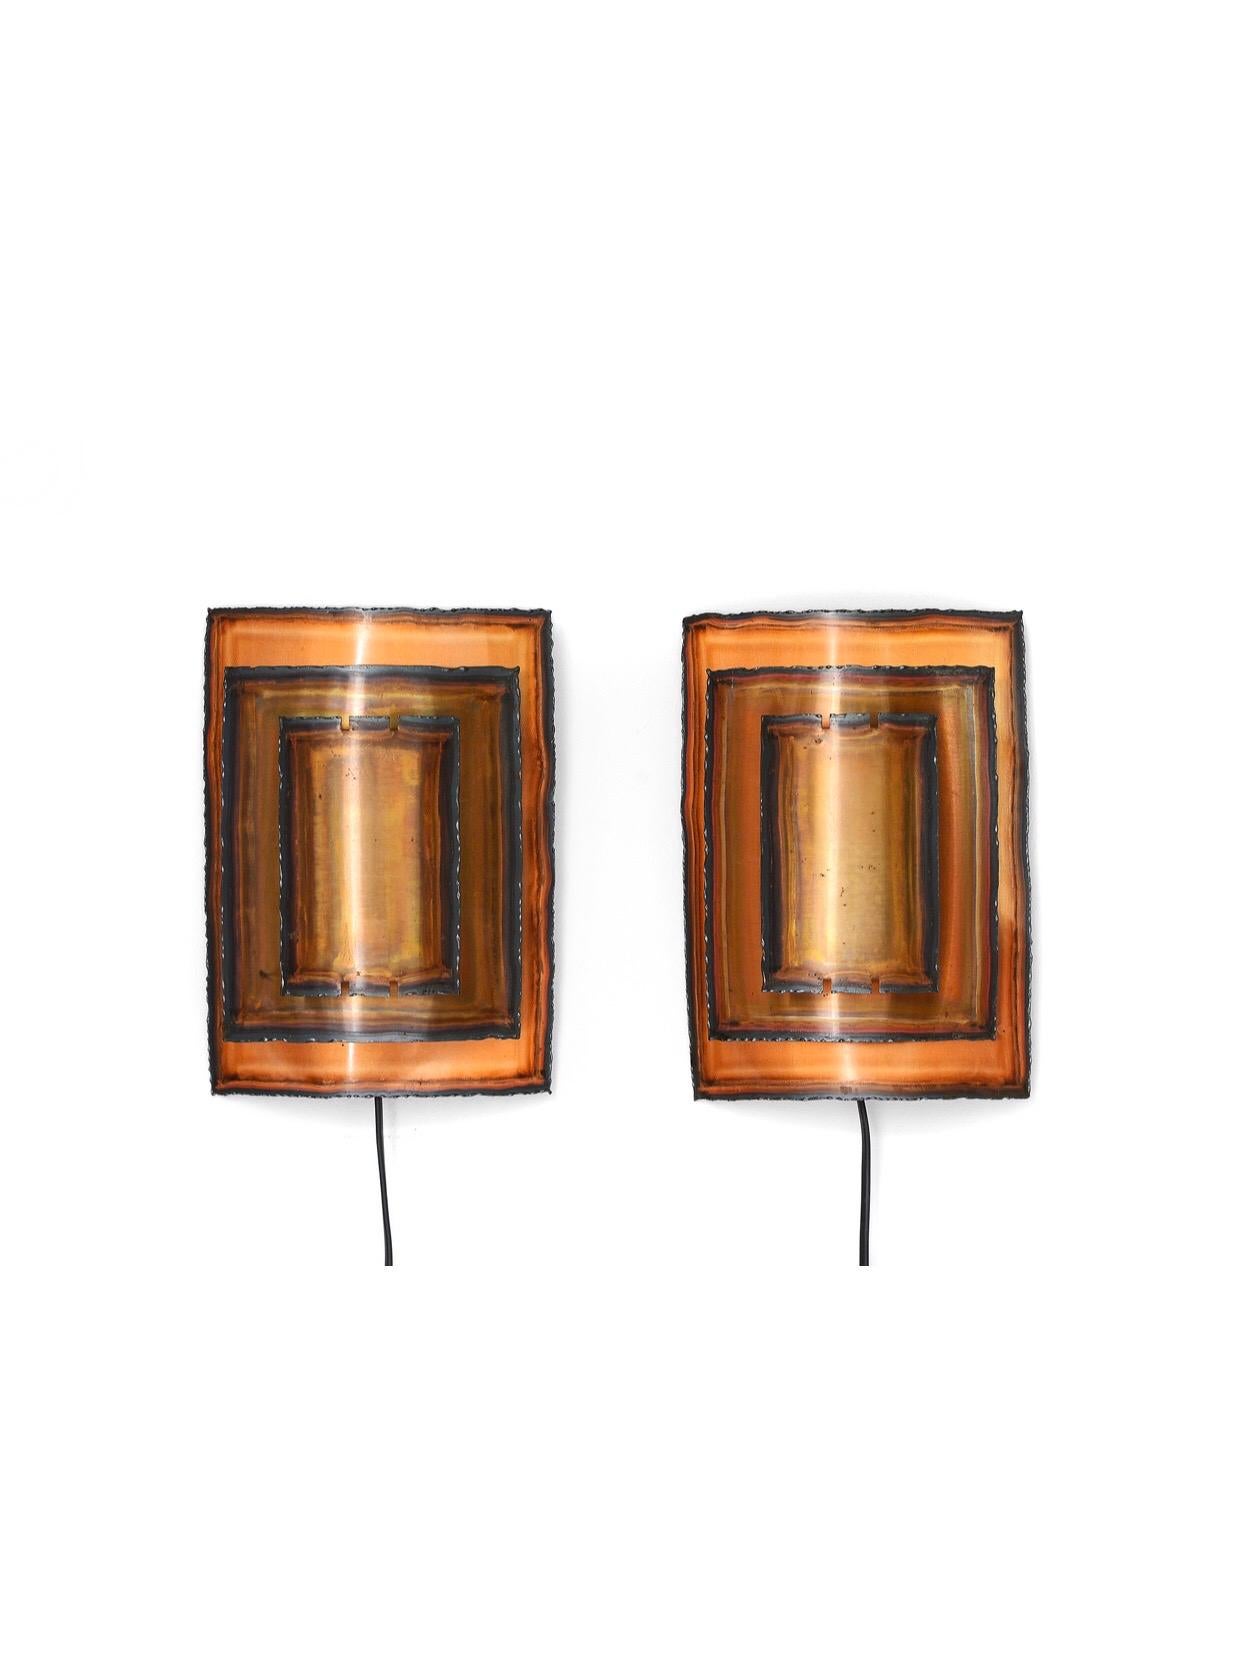 French Pair of Brutalist Wall Lights